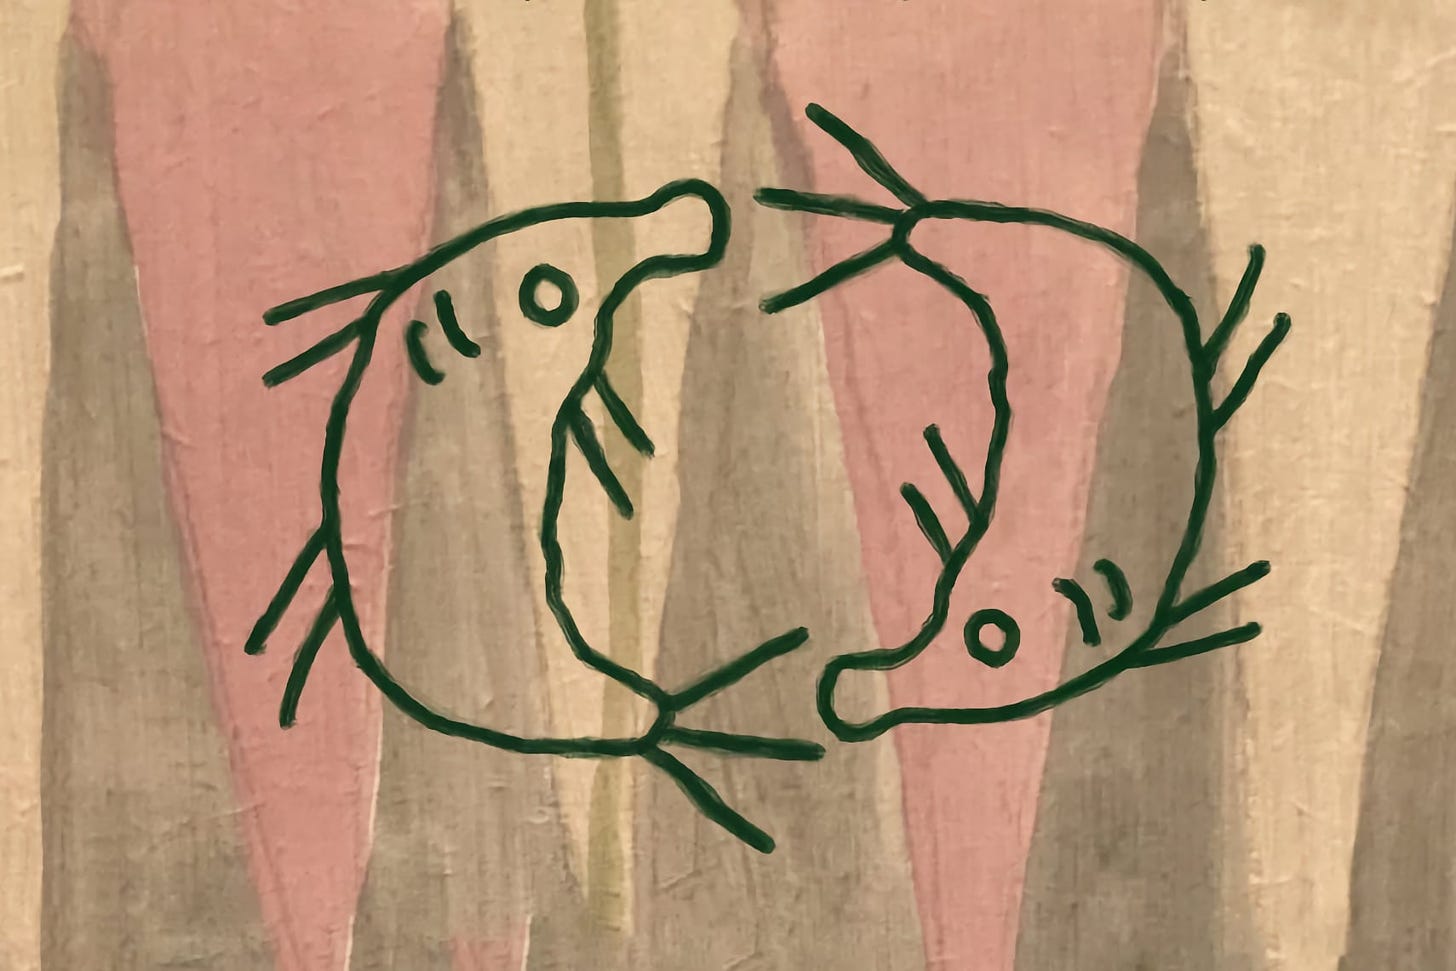  The image depicts a simple and whimsical drawing of two frog-like creatures facing each other, set against a background that appears to be painted with broad, vertical brushstrokes in pink and cream hues. The creatures are outlined in a bold green color with minimal detail, giving them a playful and abstract appearance. This kind of art often evokes a sense of innocence and can be associated with child-like creativity or a free-spirited approach to art-making.